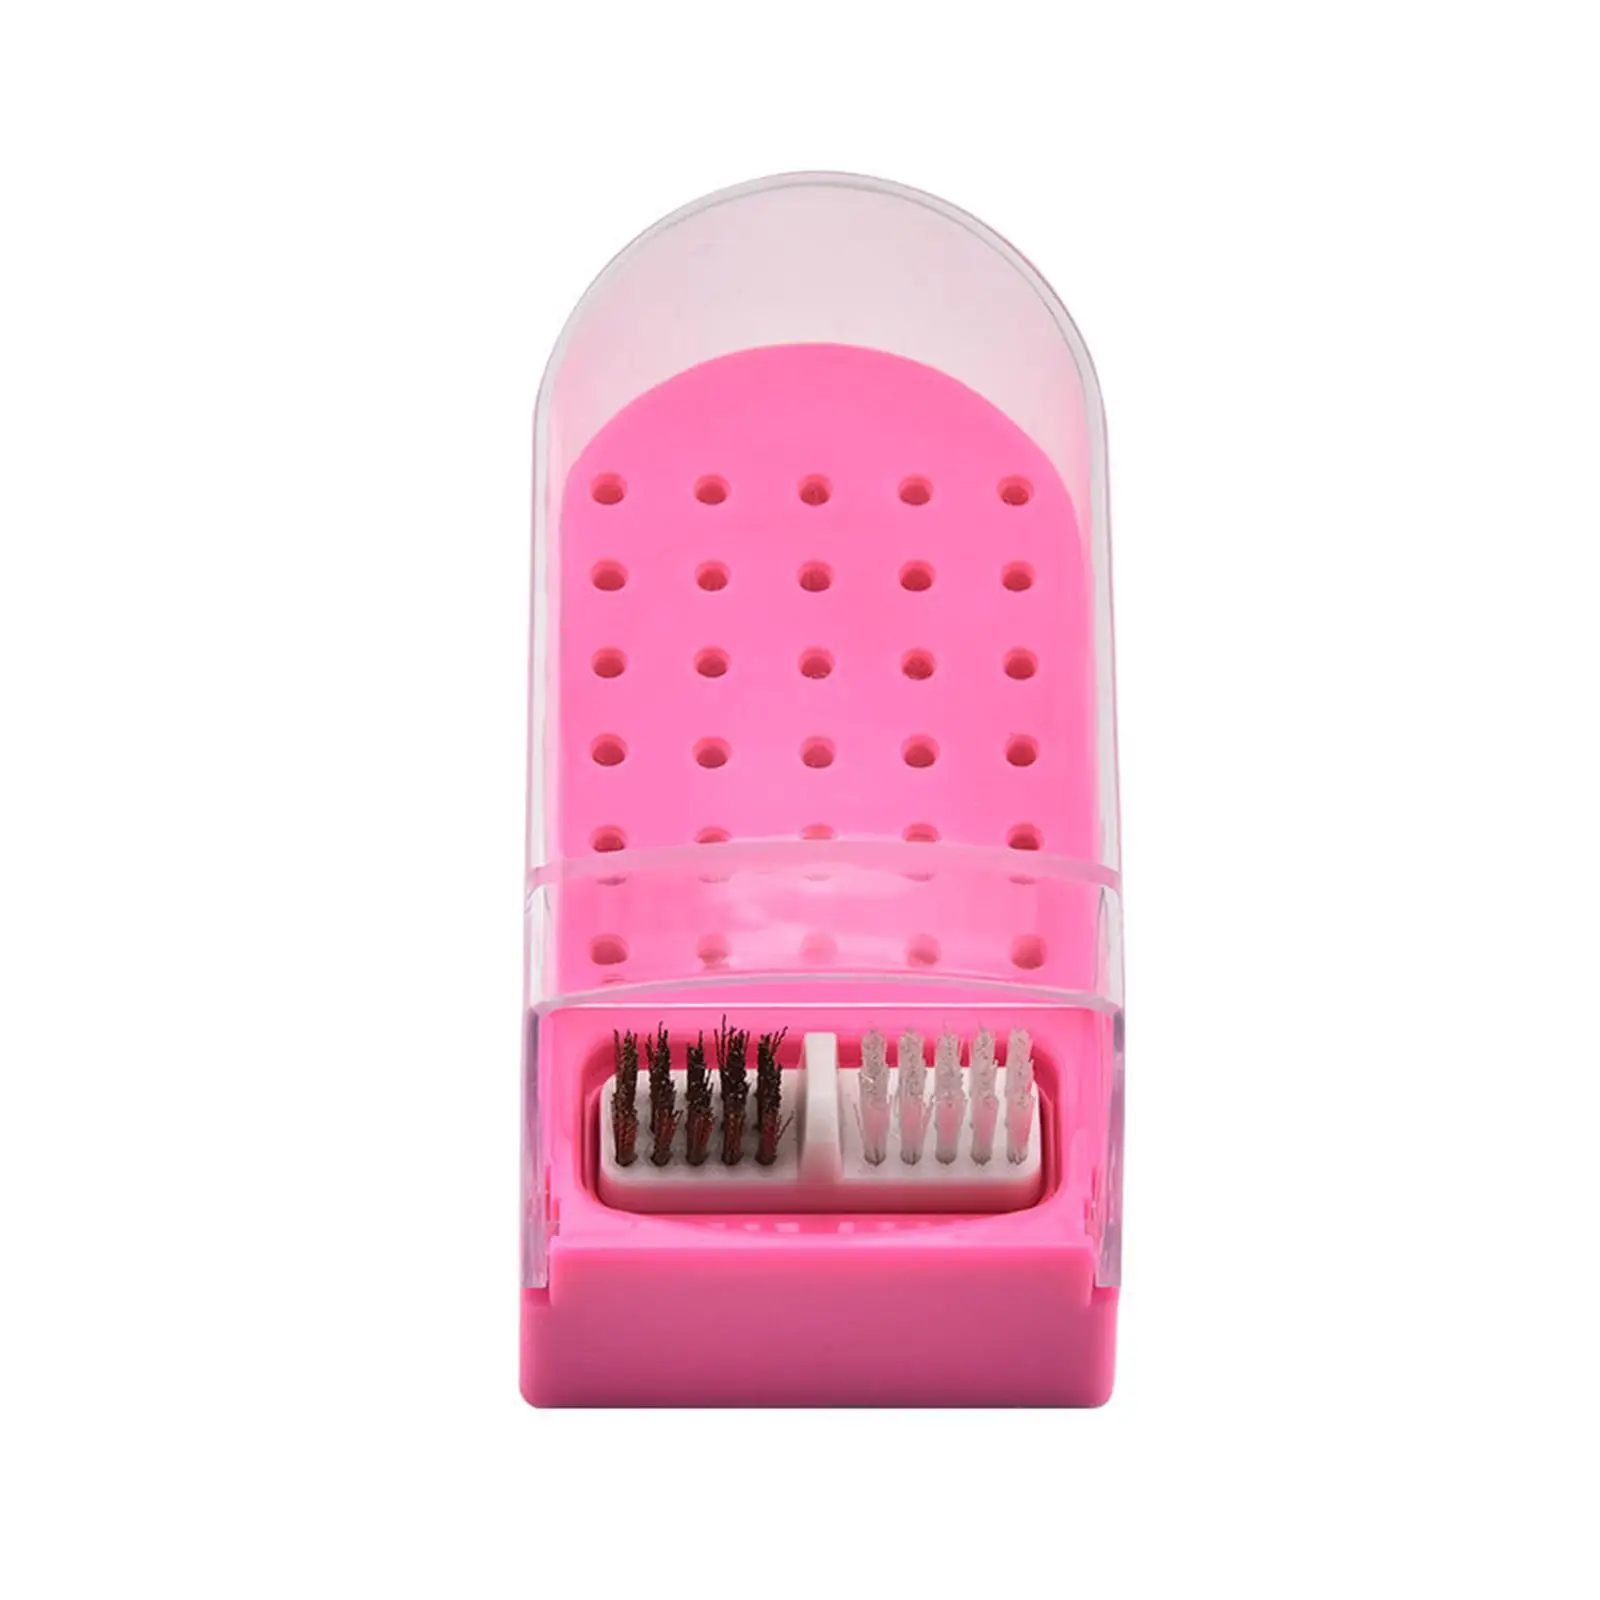 Nail Drill Bit Holder with Cleaning Brass Wire and Soft Brushes Home Use Dustproof 30 Slots Container Case Manicure Accessories